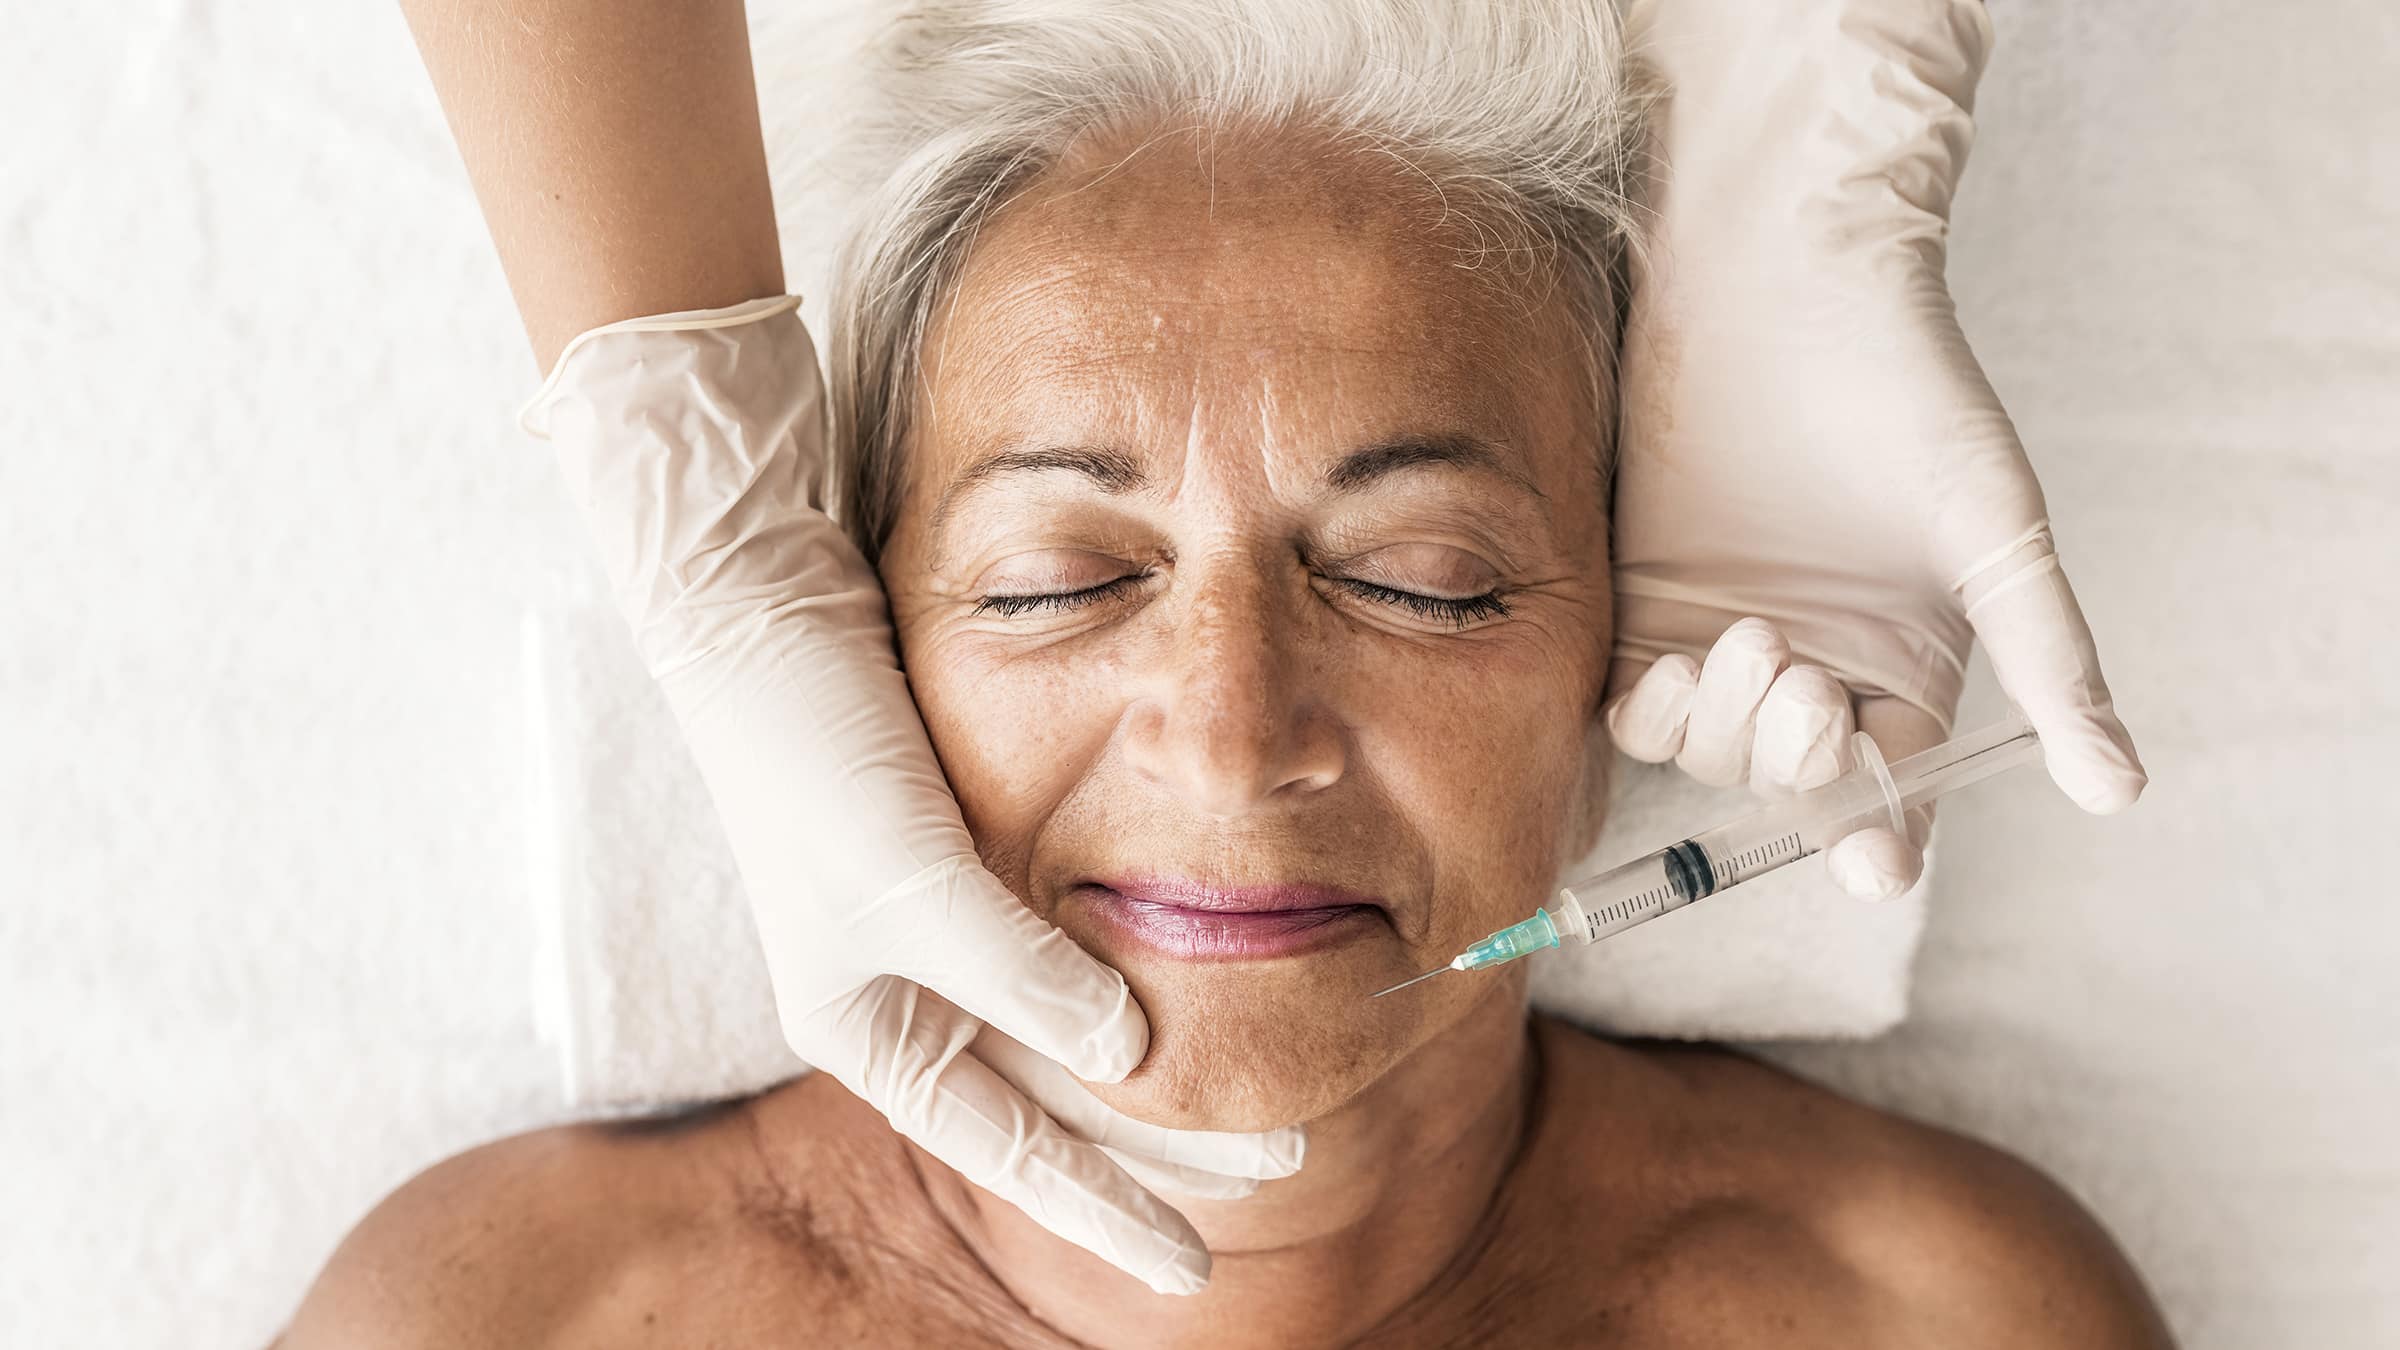 What should you avoid after Botox?